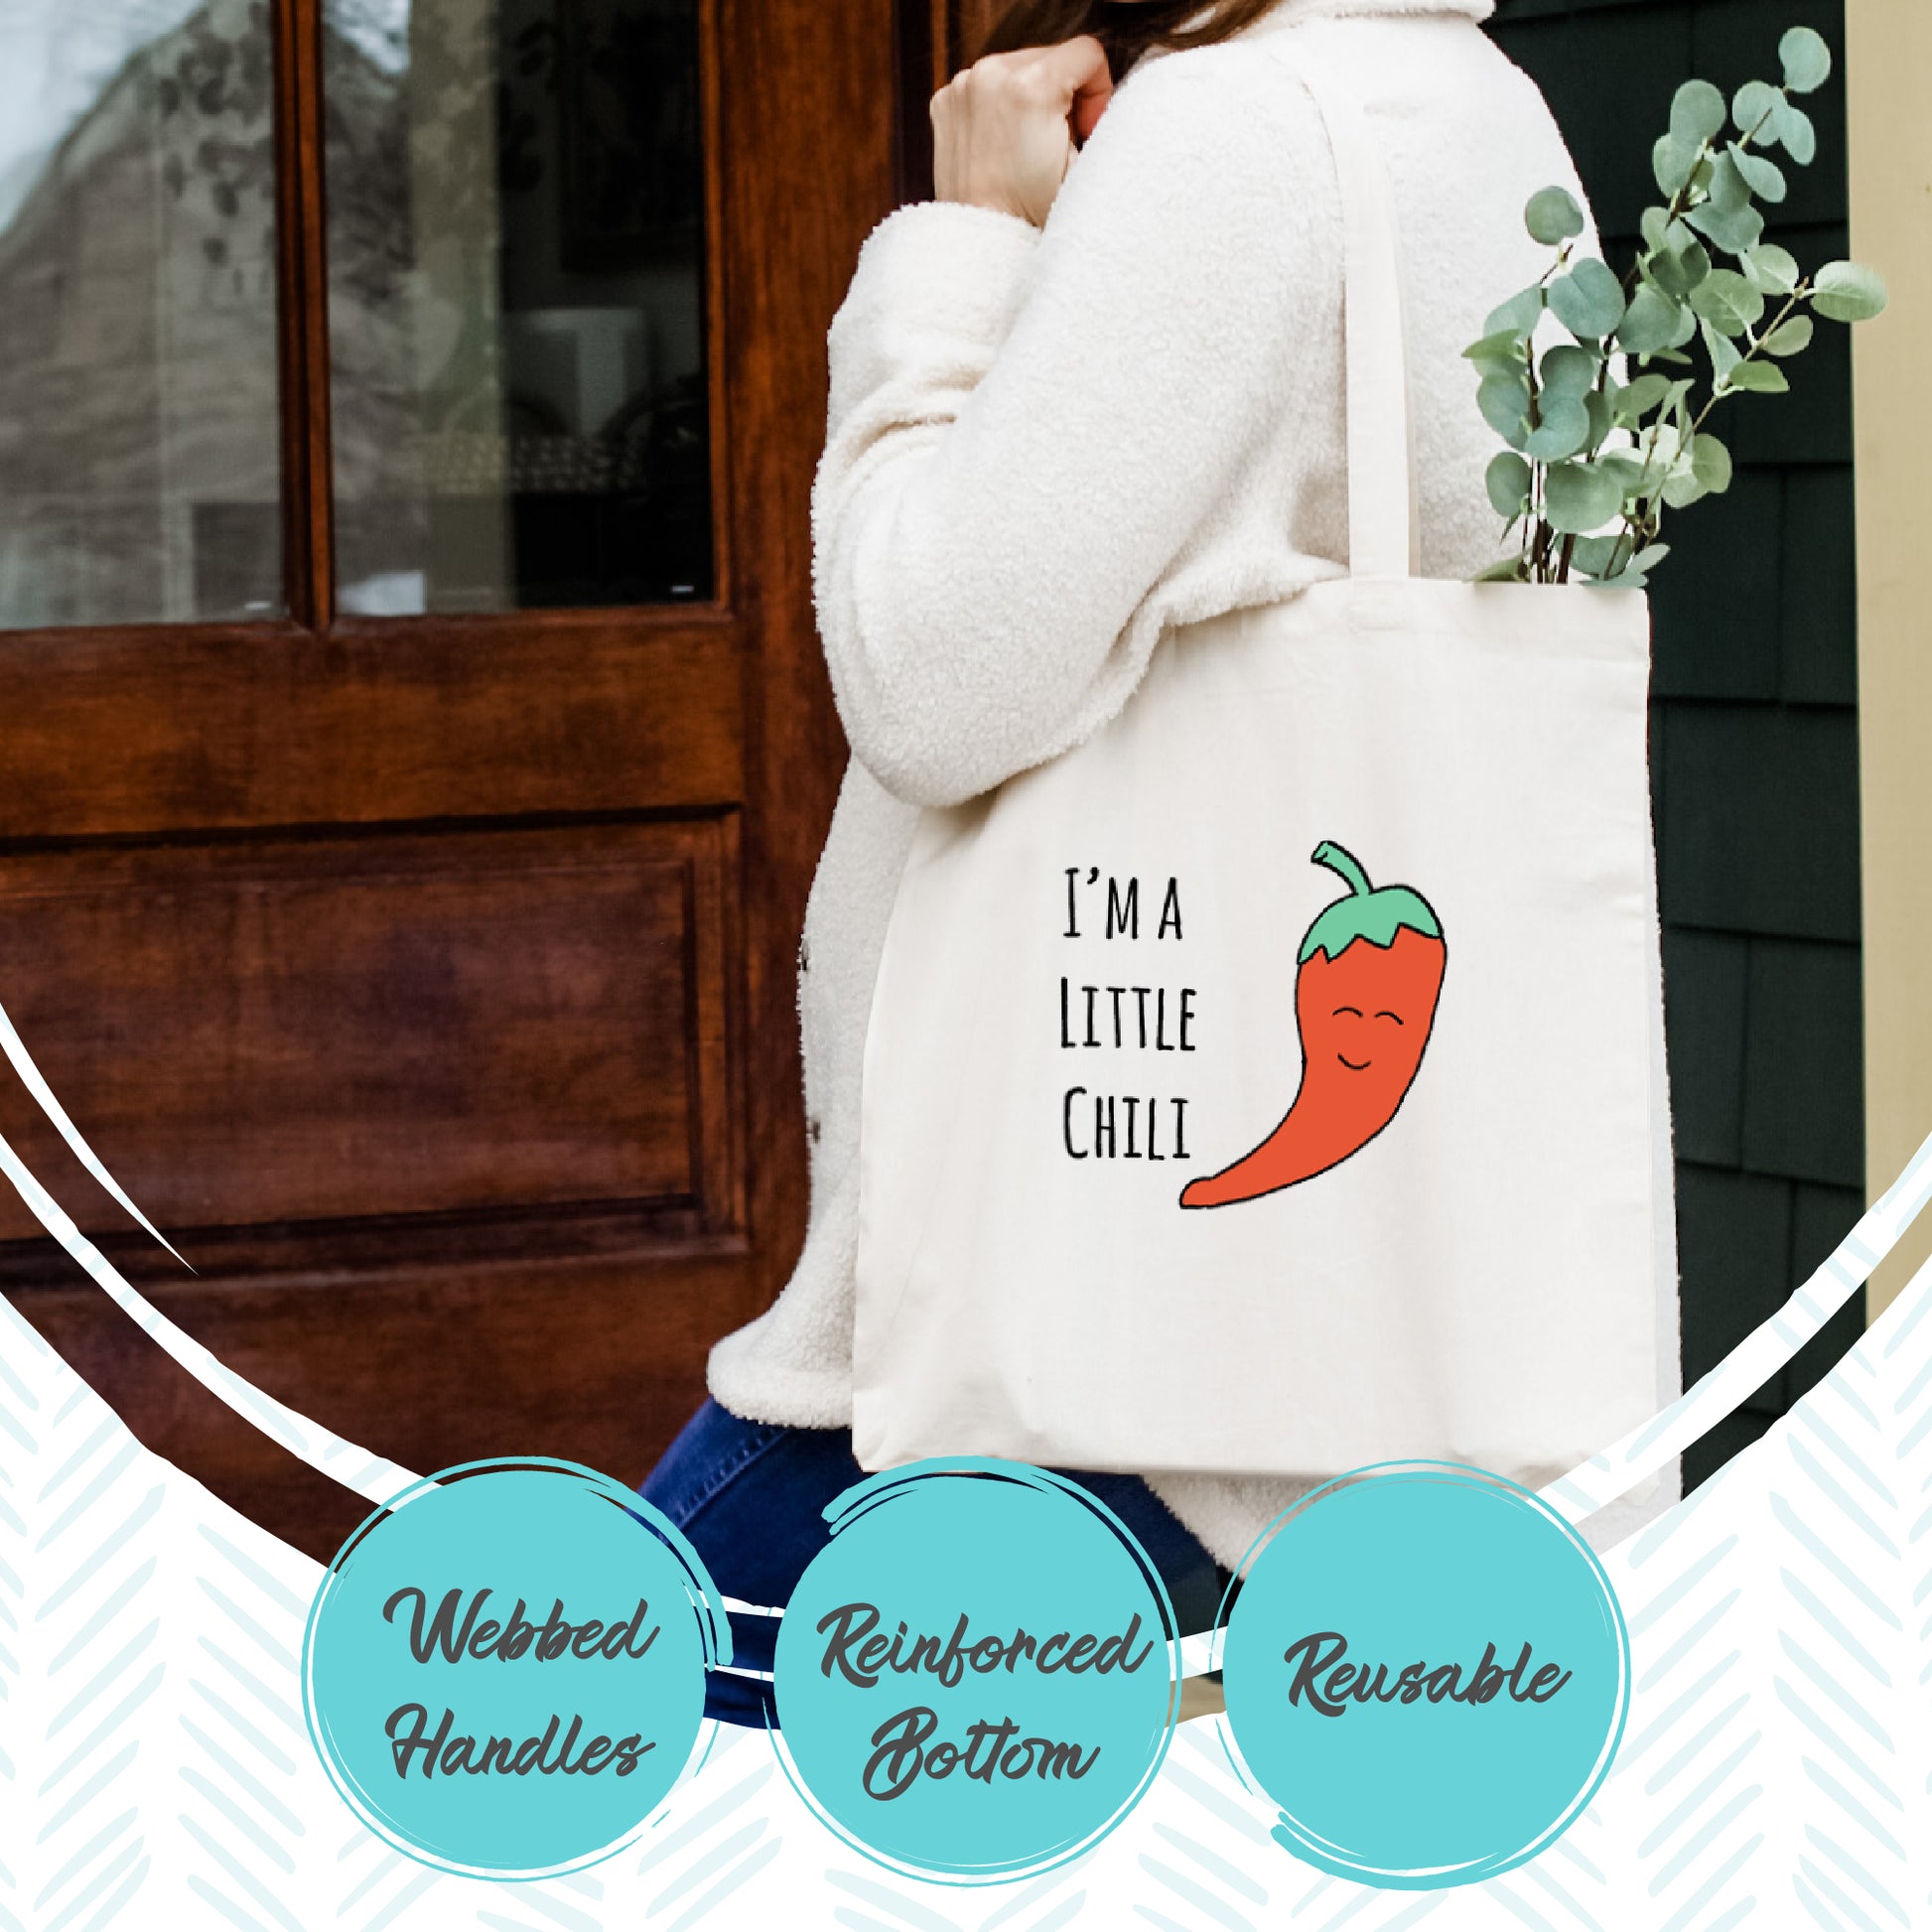 A Cup Of Tea Solves Everything (Cups) - Full Color Tote - MoonlightMakers